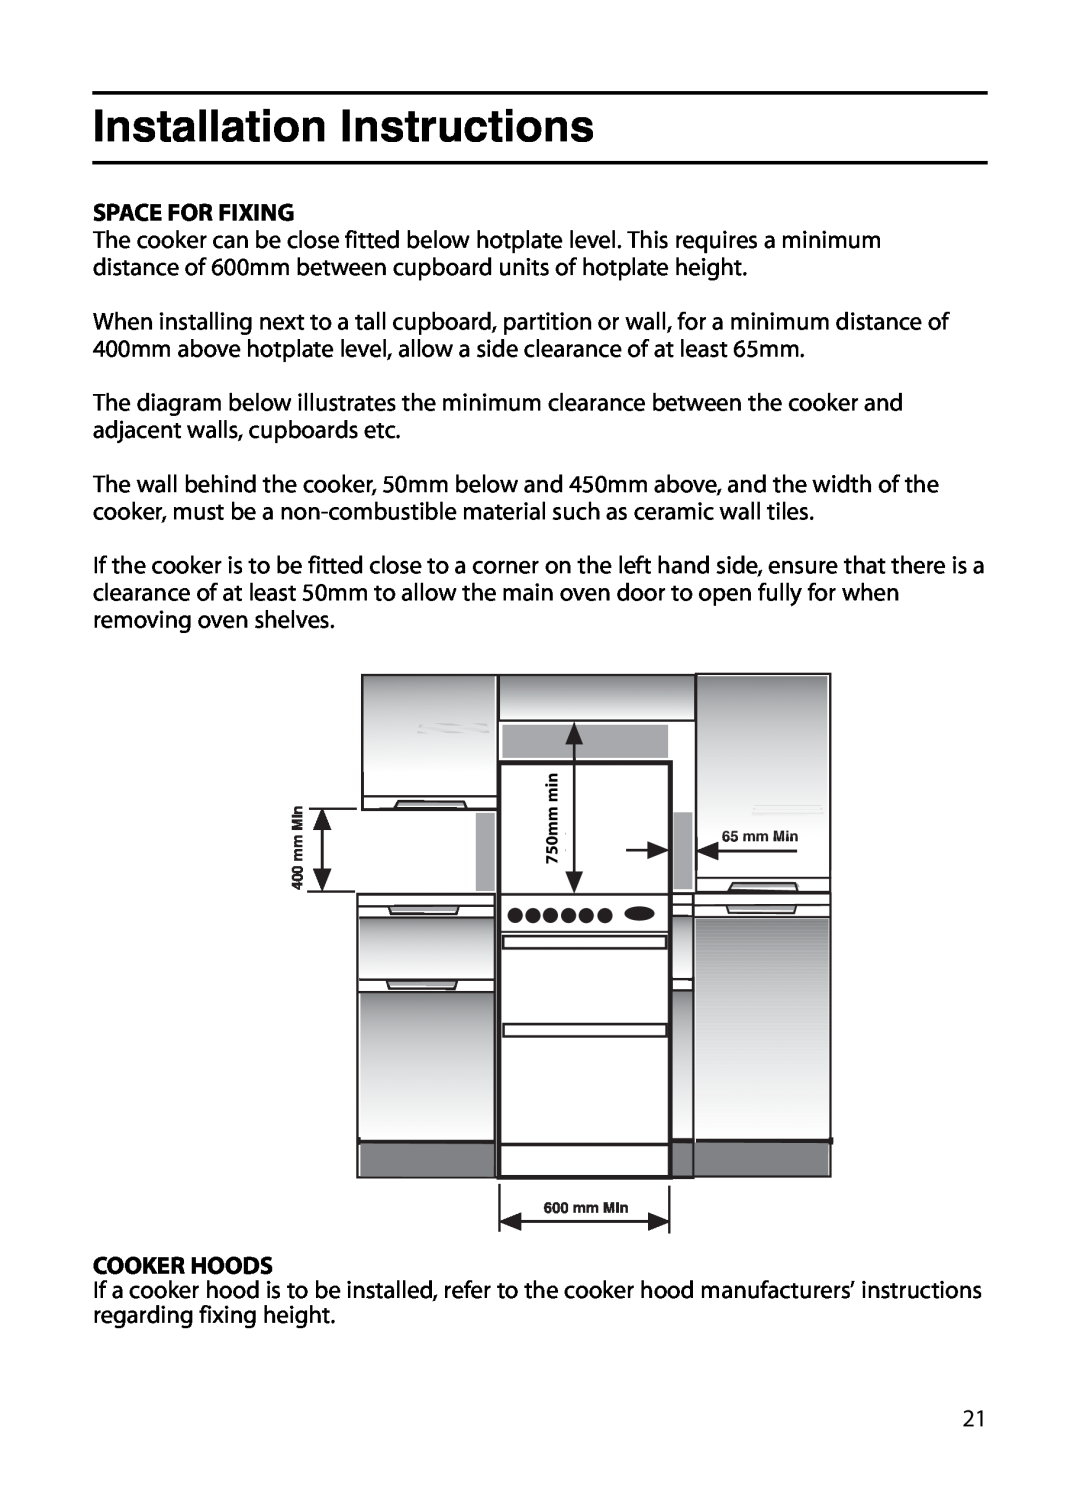 Indesit KT6G2W, KT6G2M manual Space For Fixing, Cooker Hoods, Installation Instructions 